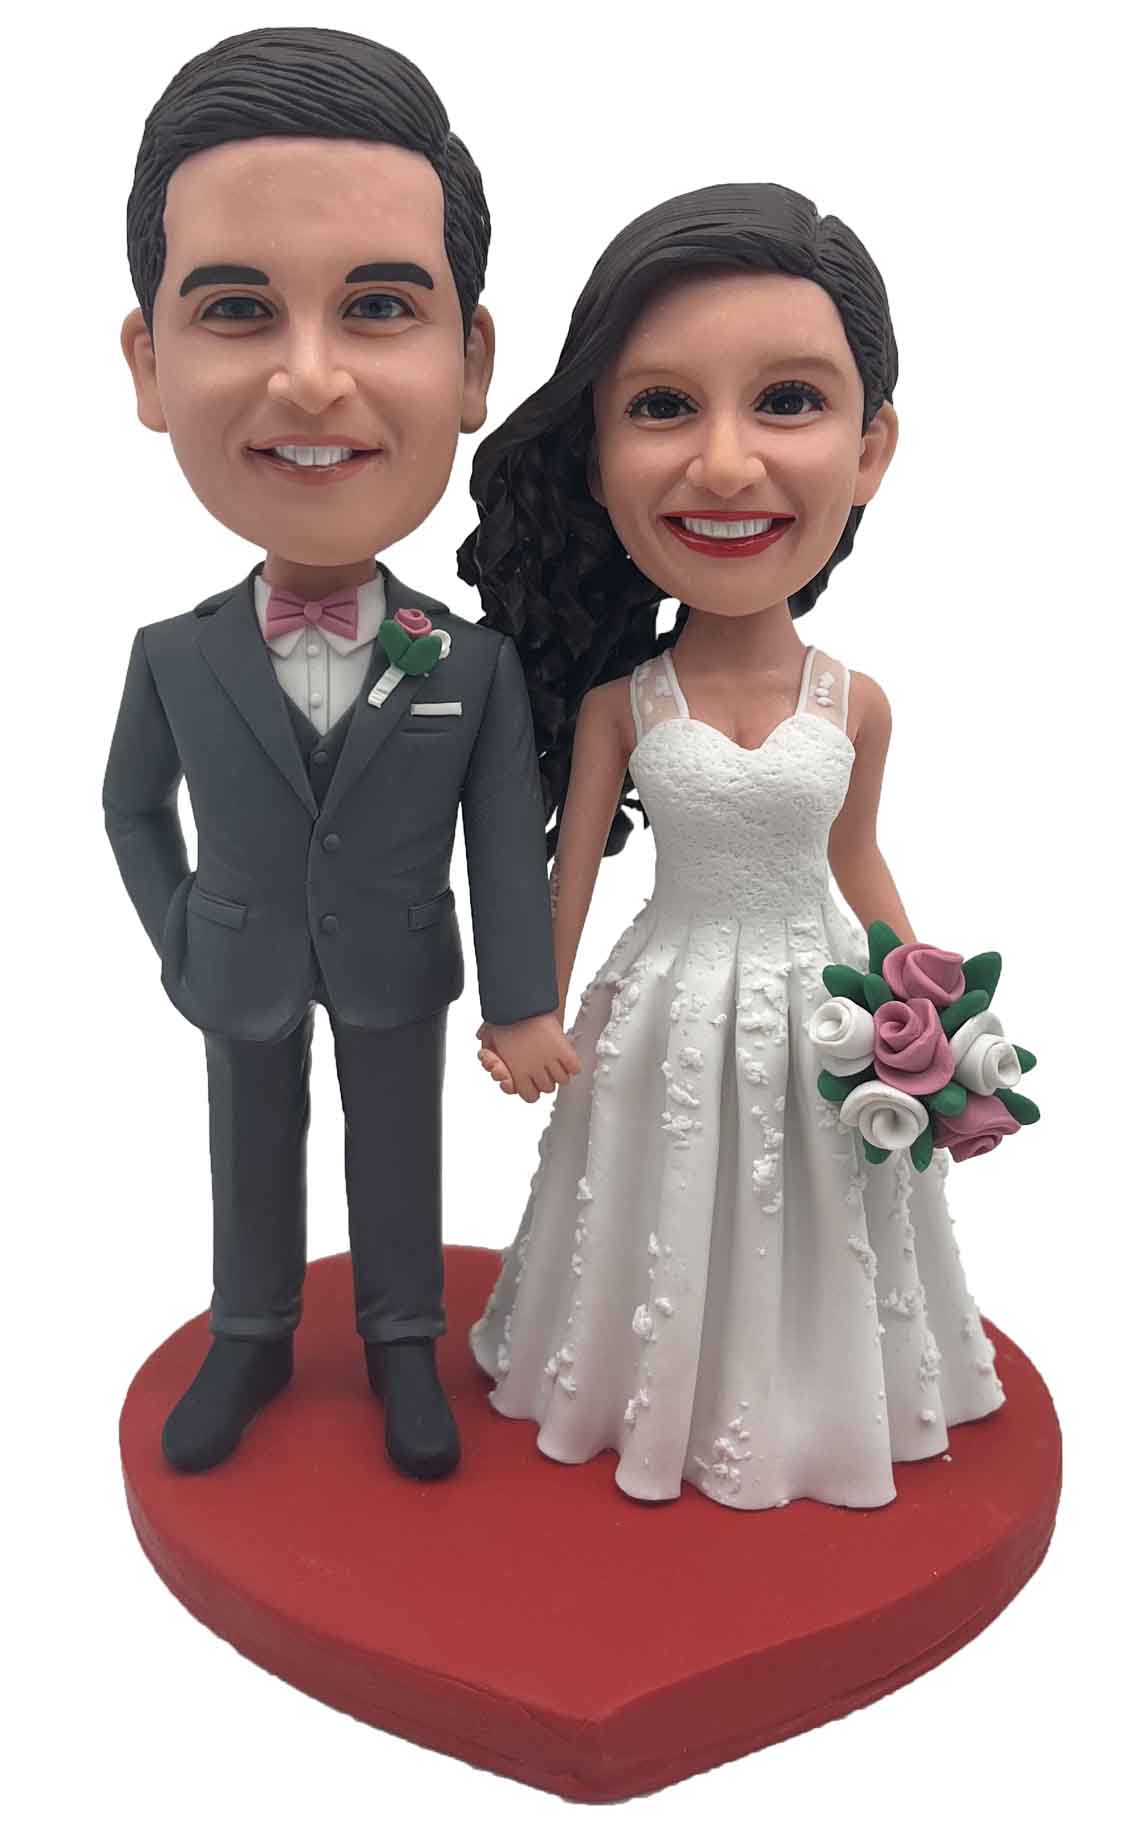 Custom wedding Cake Toppers Personalized wedding cake toppers